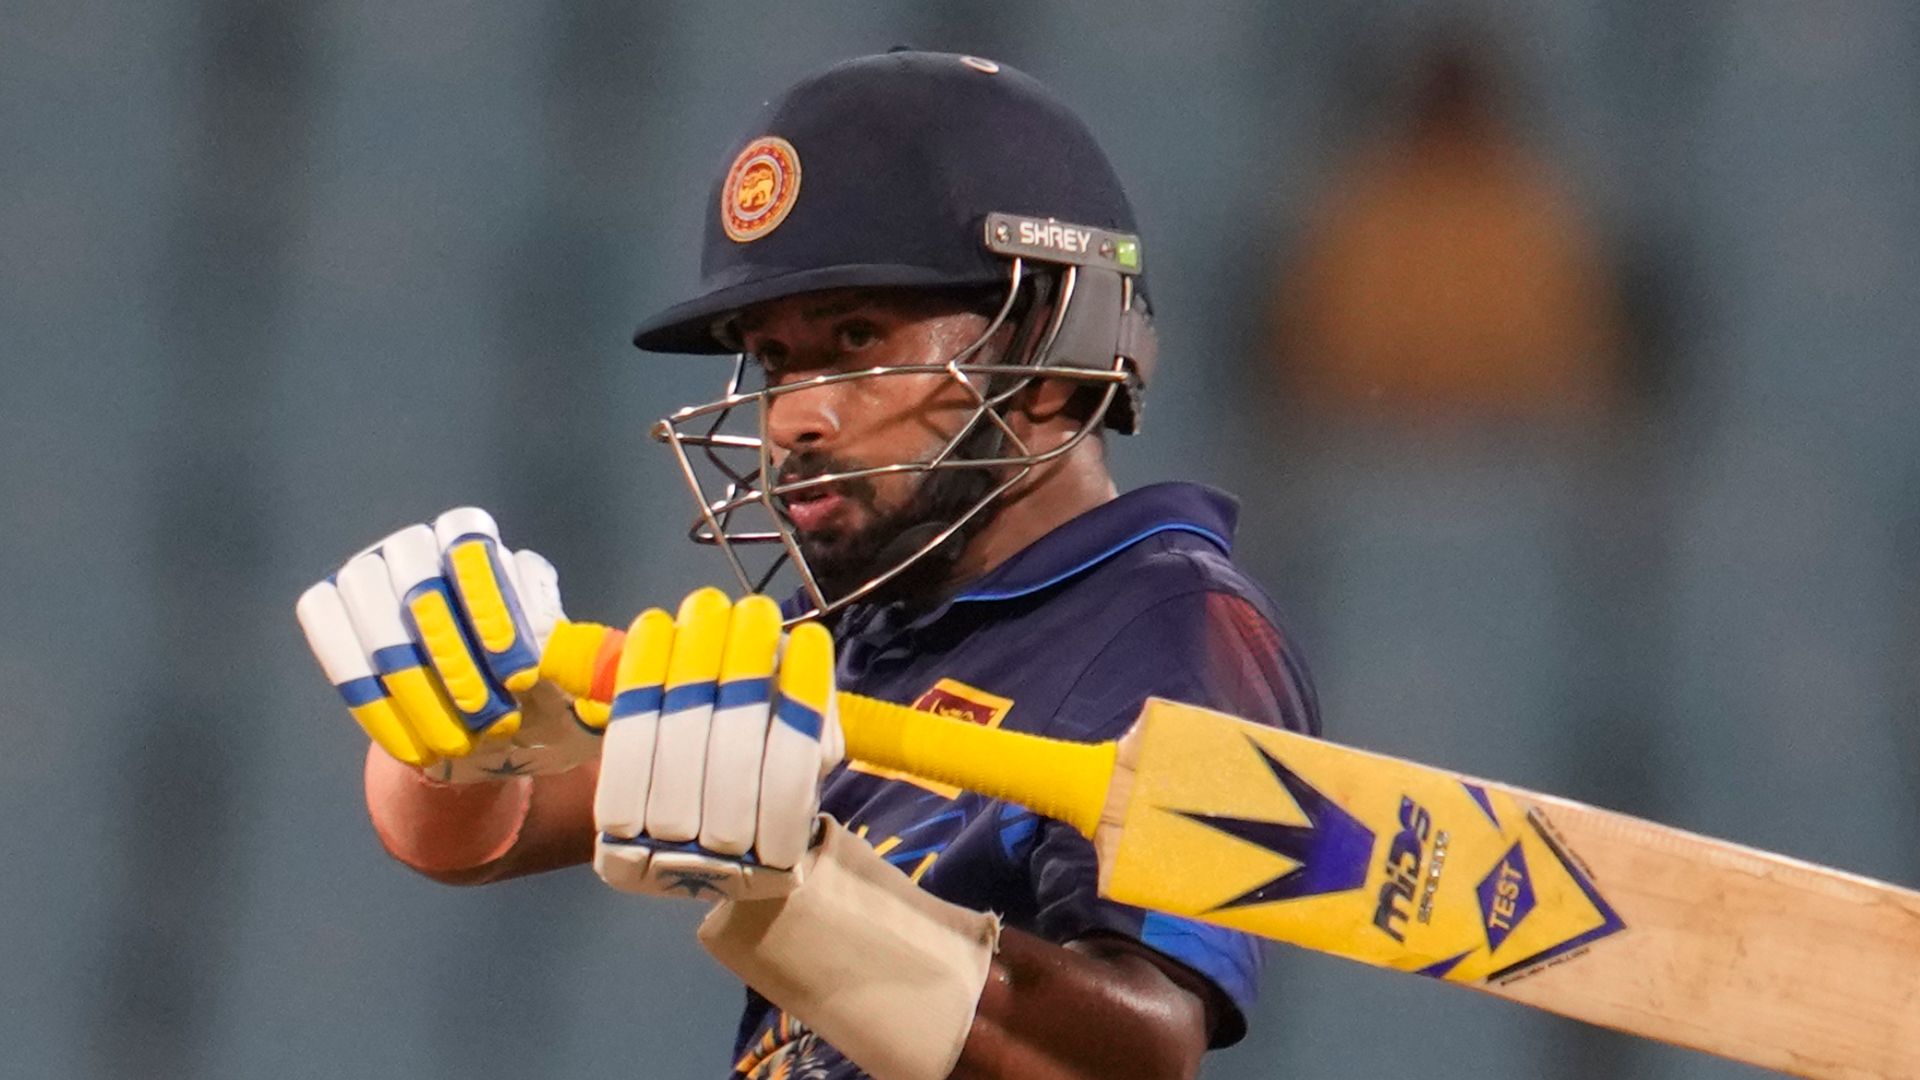 Sri Lanka beat Netherlands to record first World Cup win